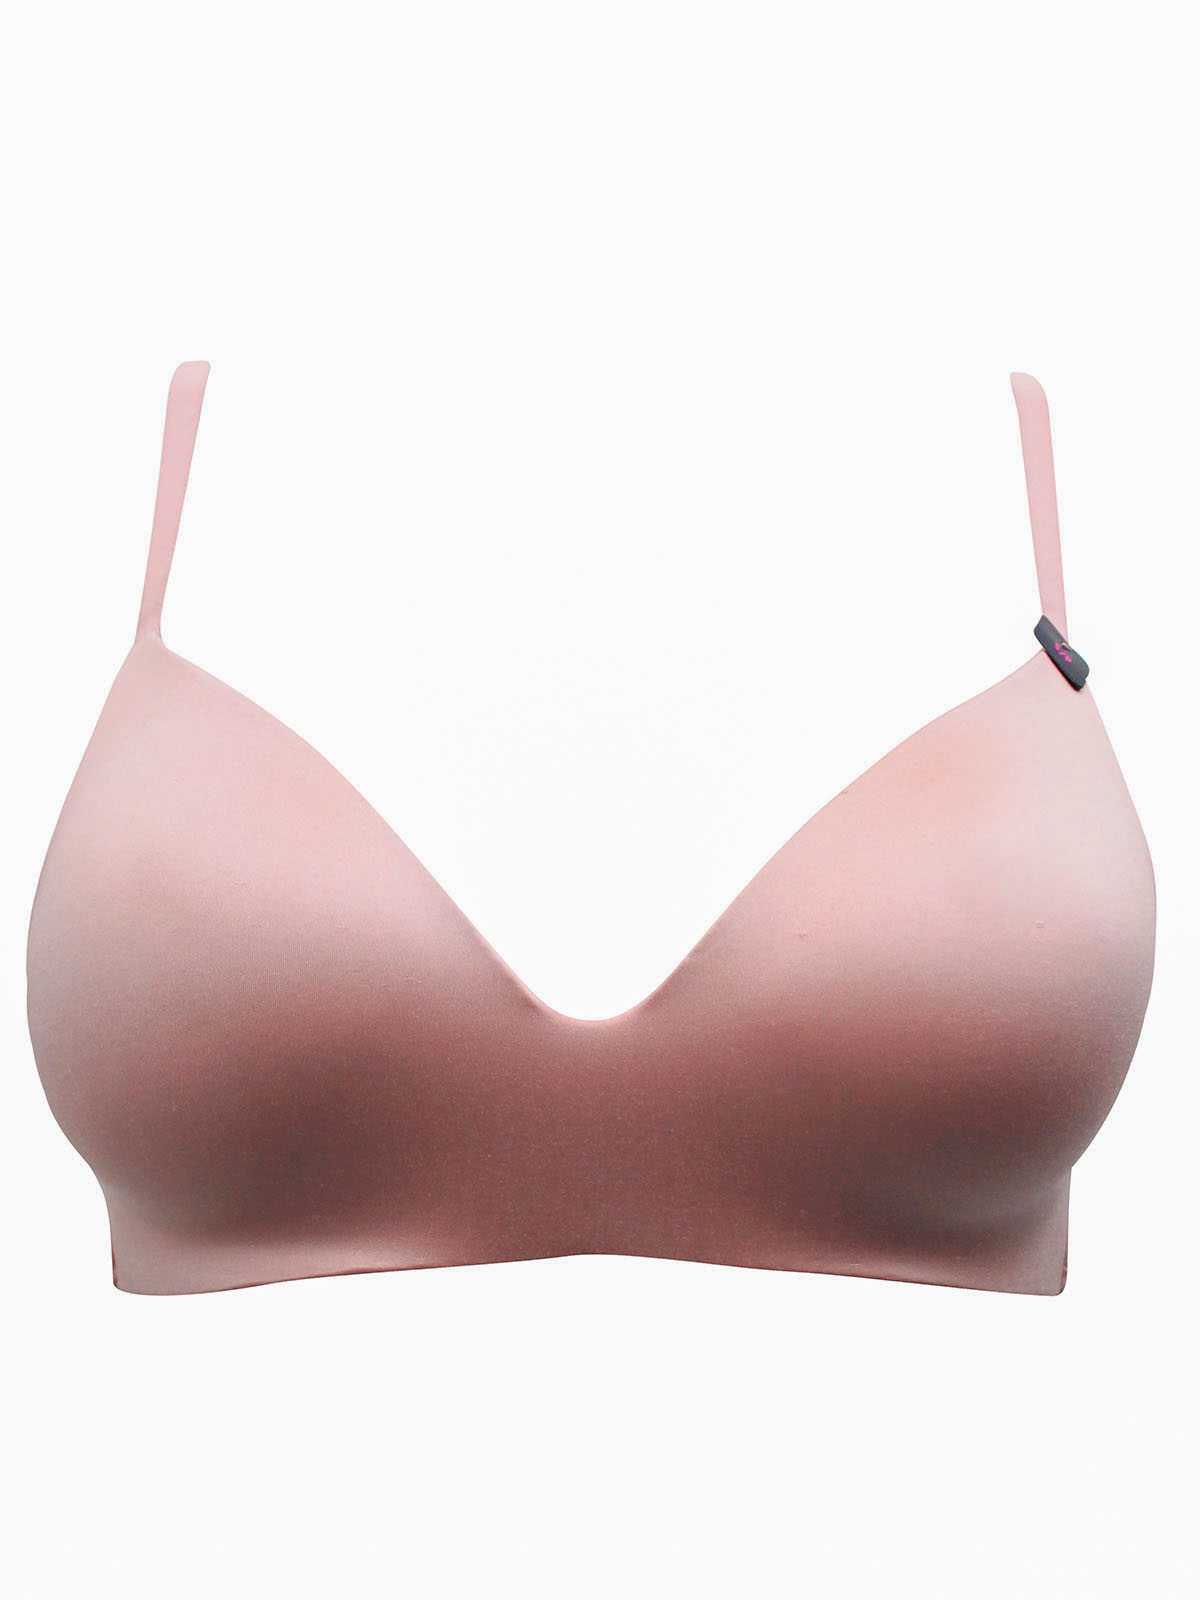 ellen tracy pink lightly lined textured bra size 38c 